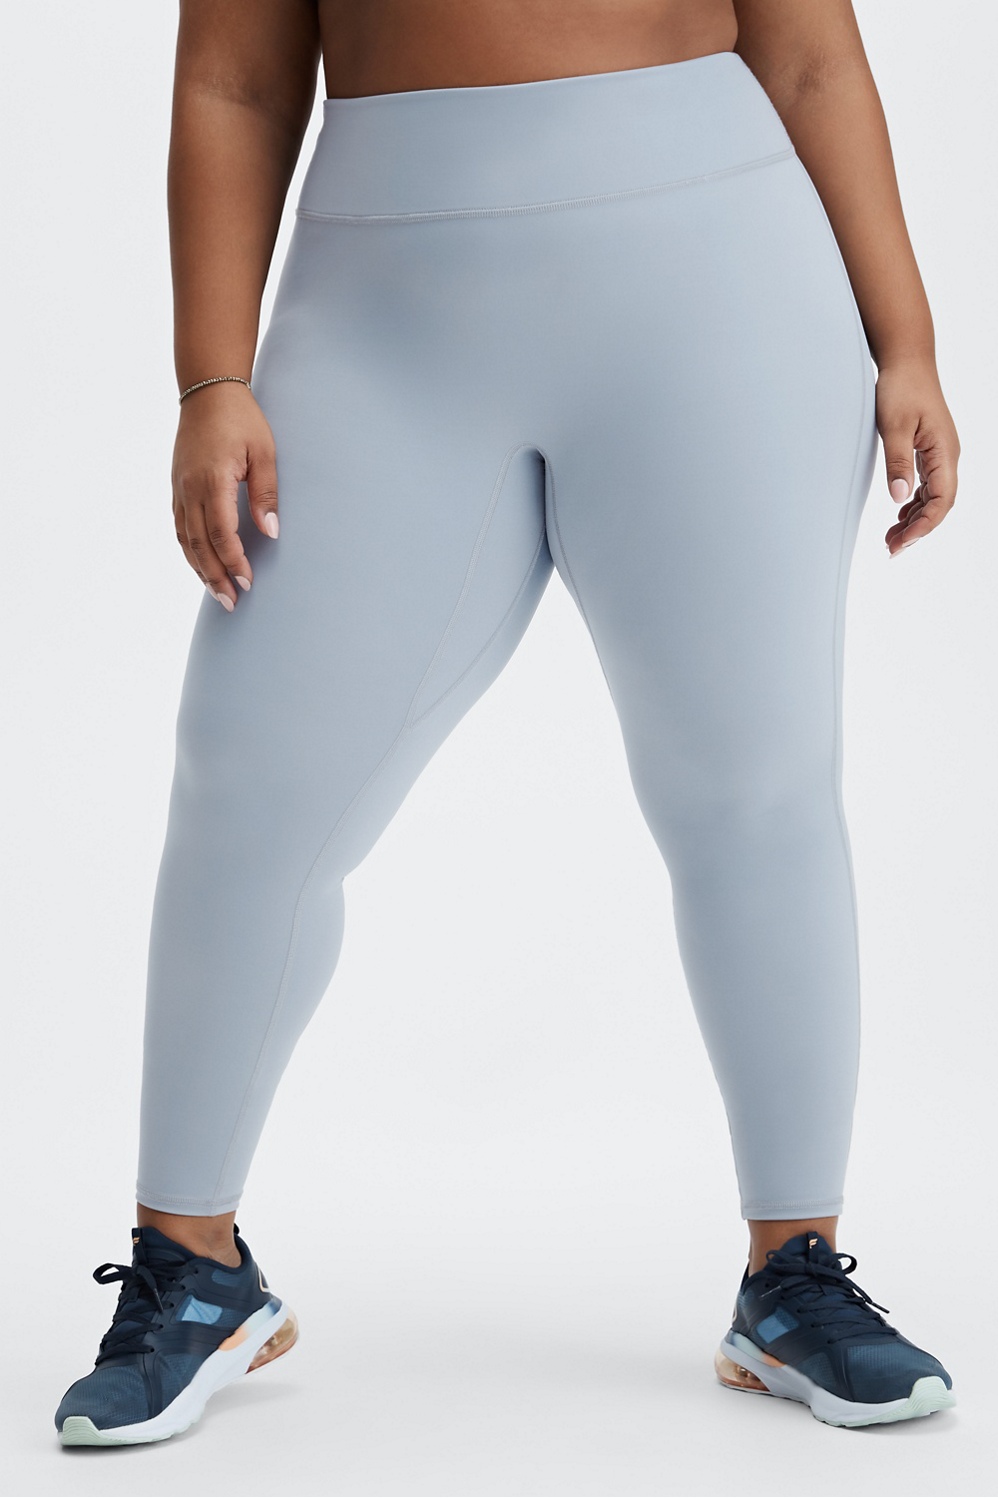 2 Leggings for ONLY $24 😍, I'm so excited for you to see my new  collection with Fabletics! ❤️❤️